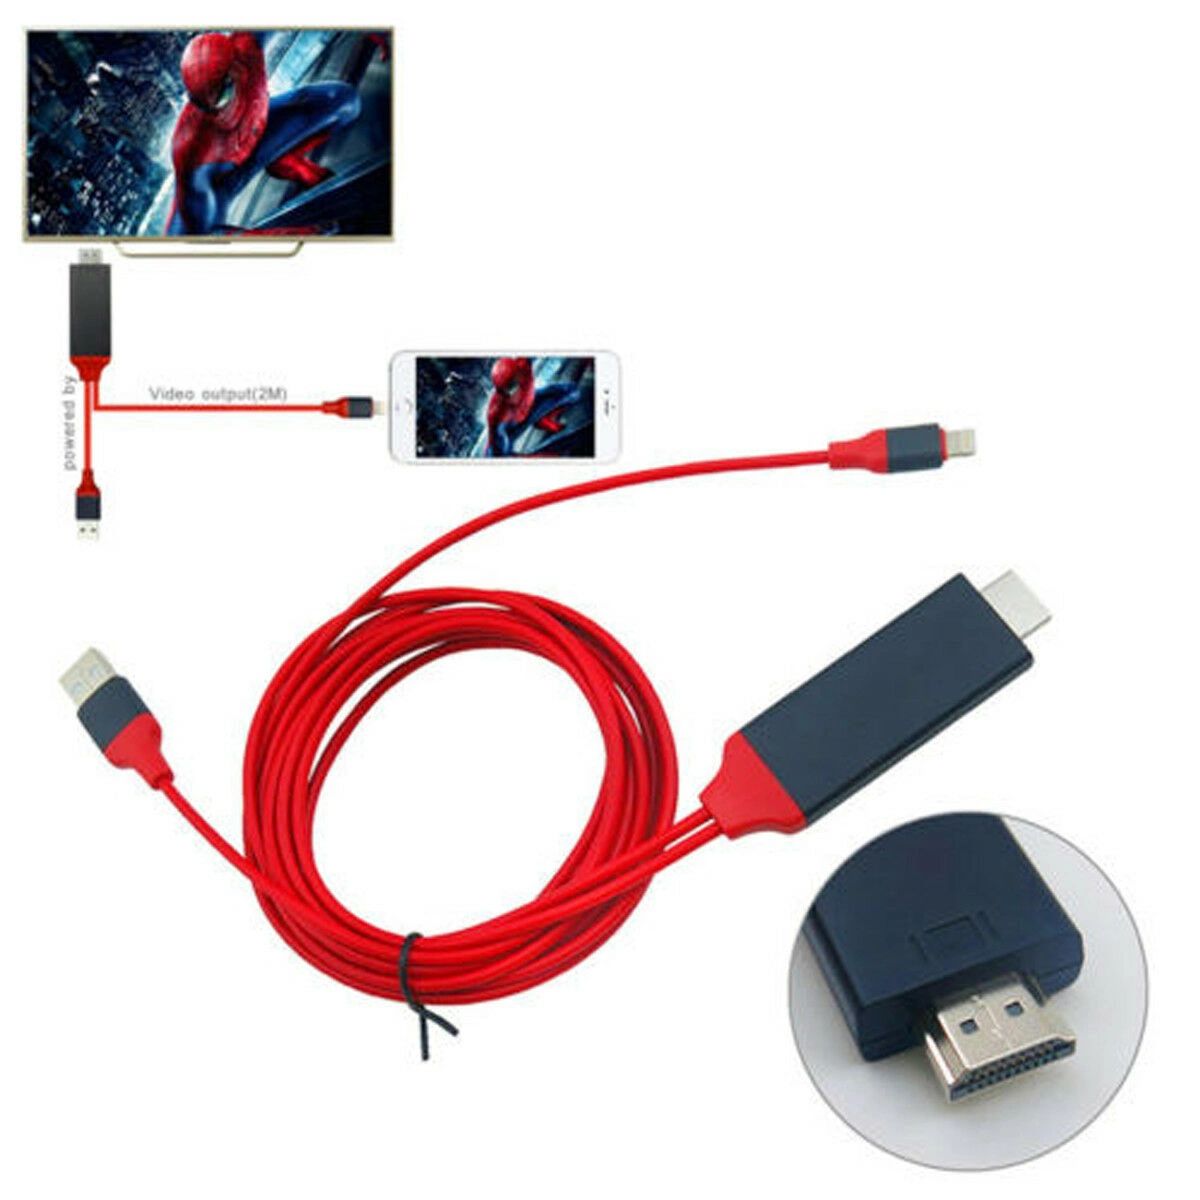 ANDOWL QY-i01 LIGHTNING USB HDMI HDTV TV VIDEO ADAPTER CABLE FOR IPAD &  IPHONE